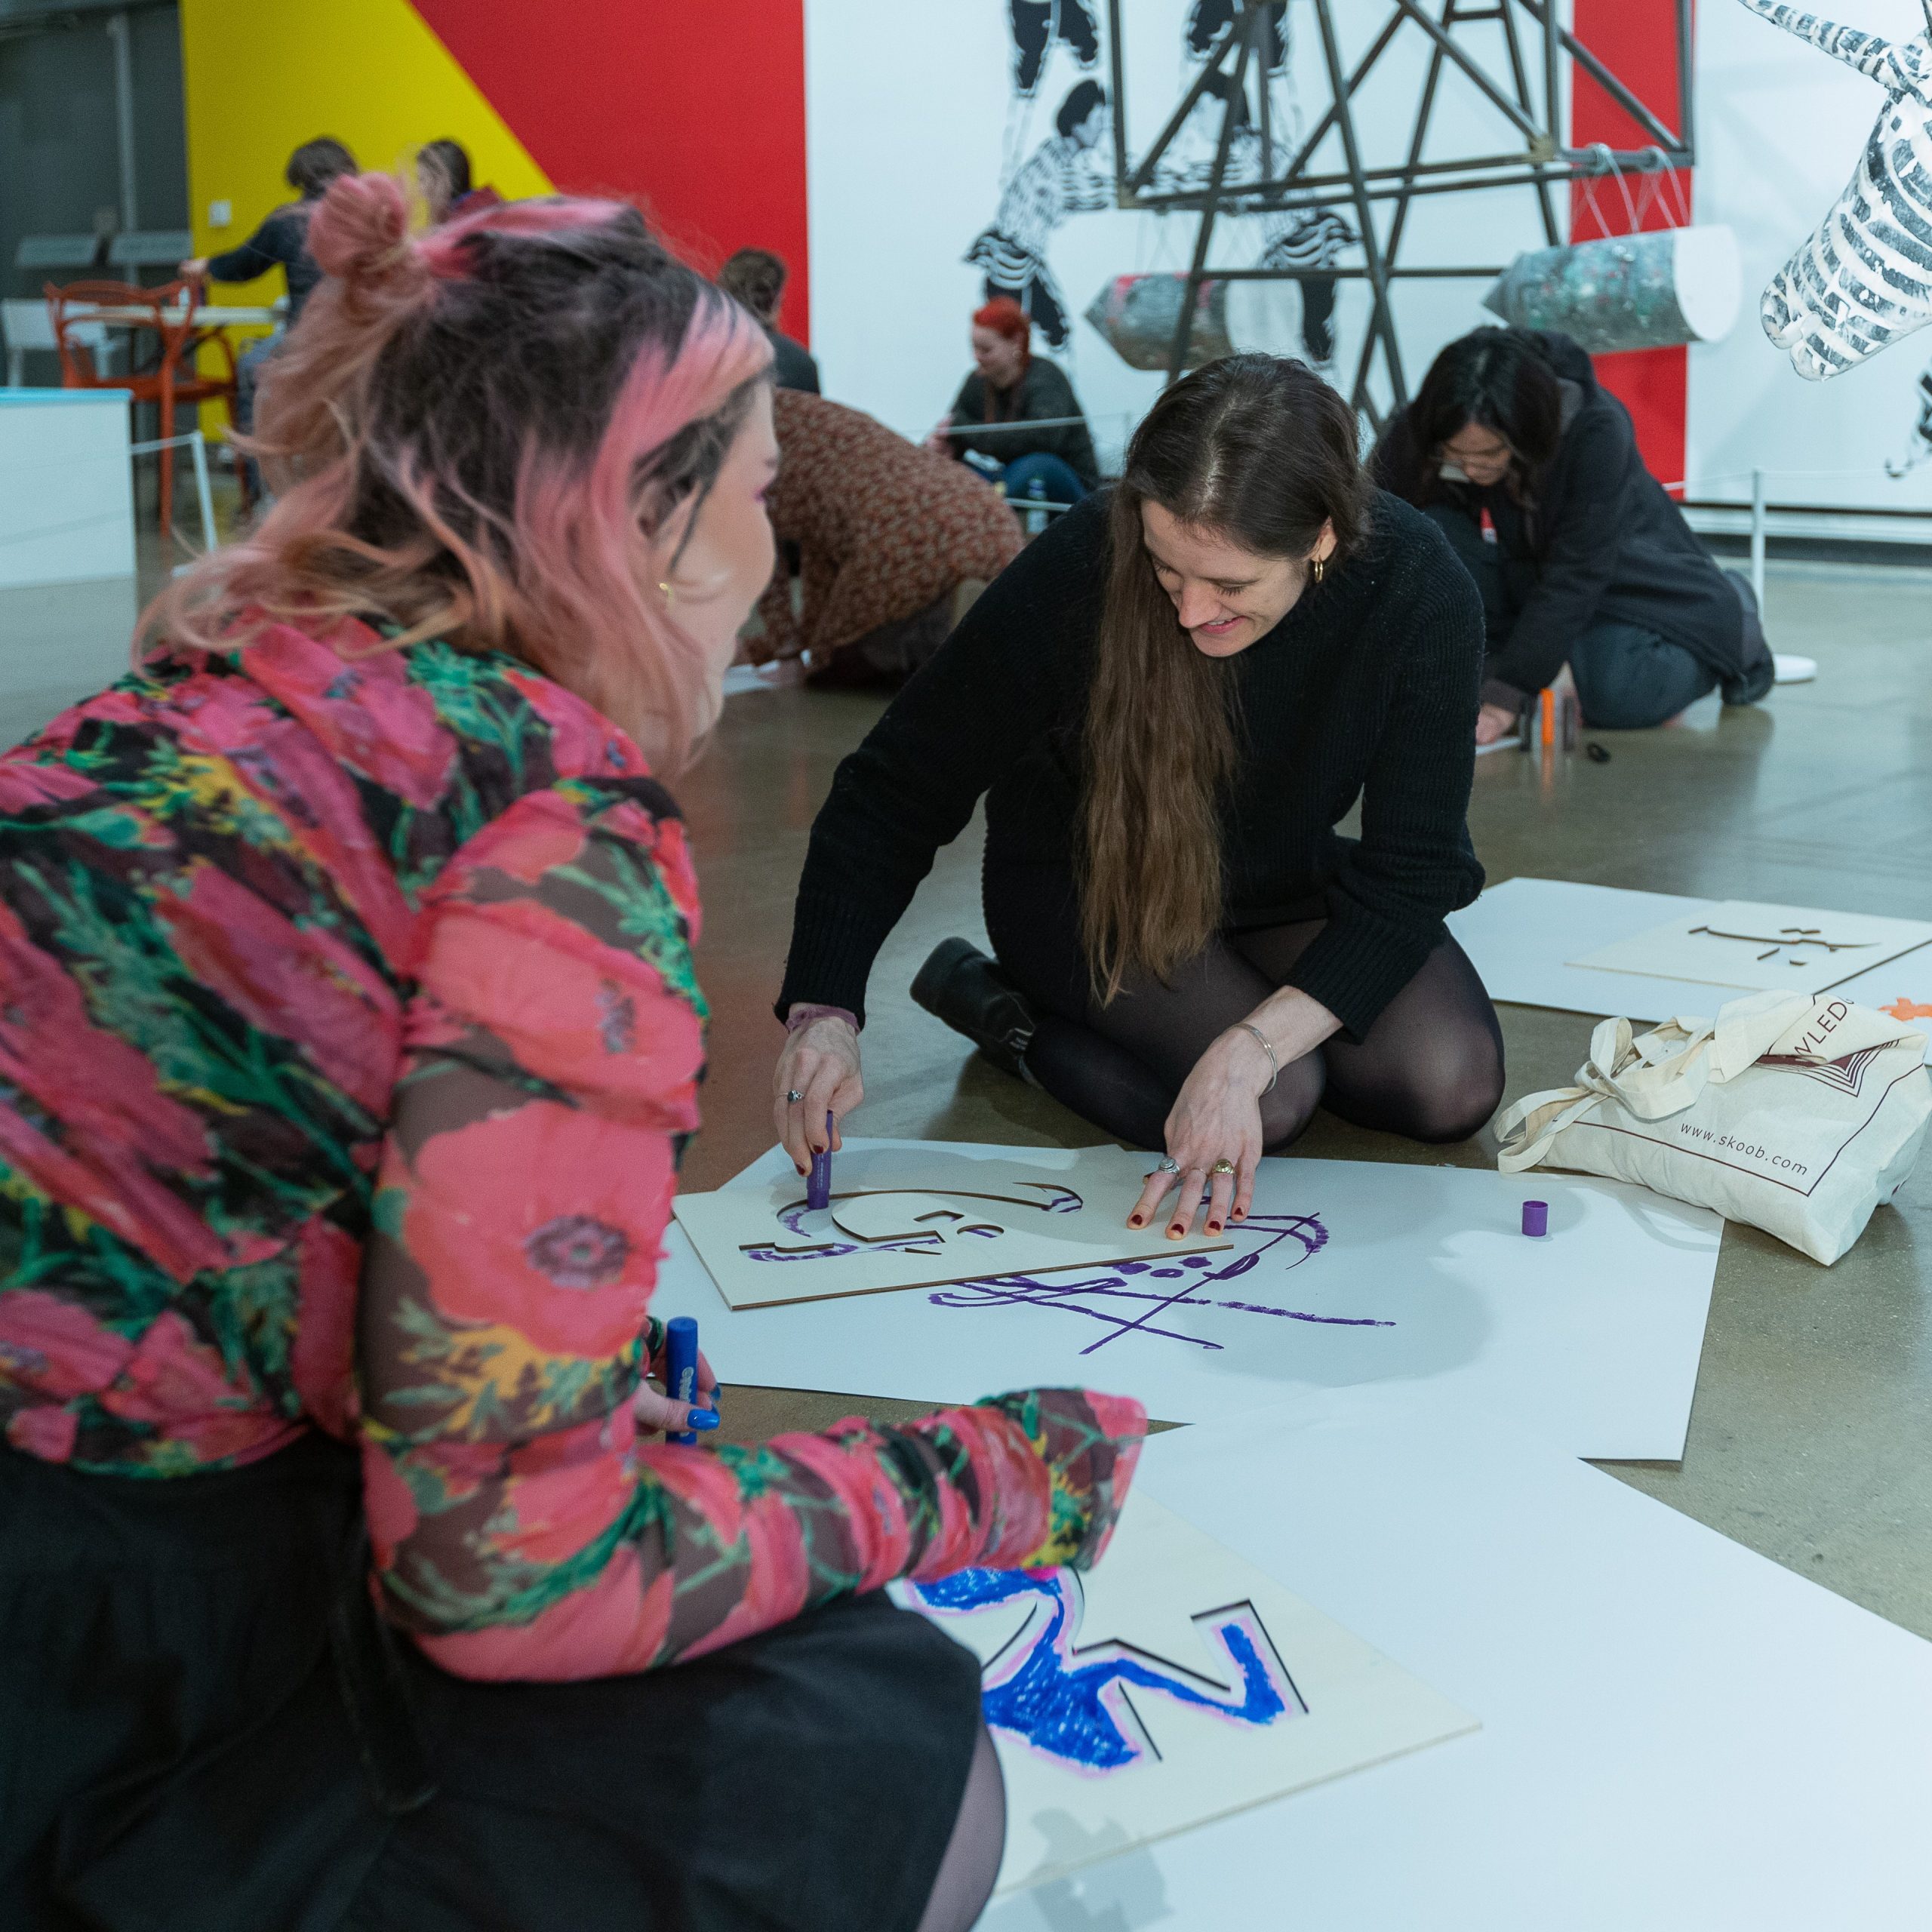 Two white women on the floor of a gallery drawing on pieces of paper.